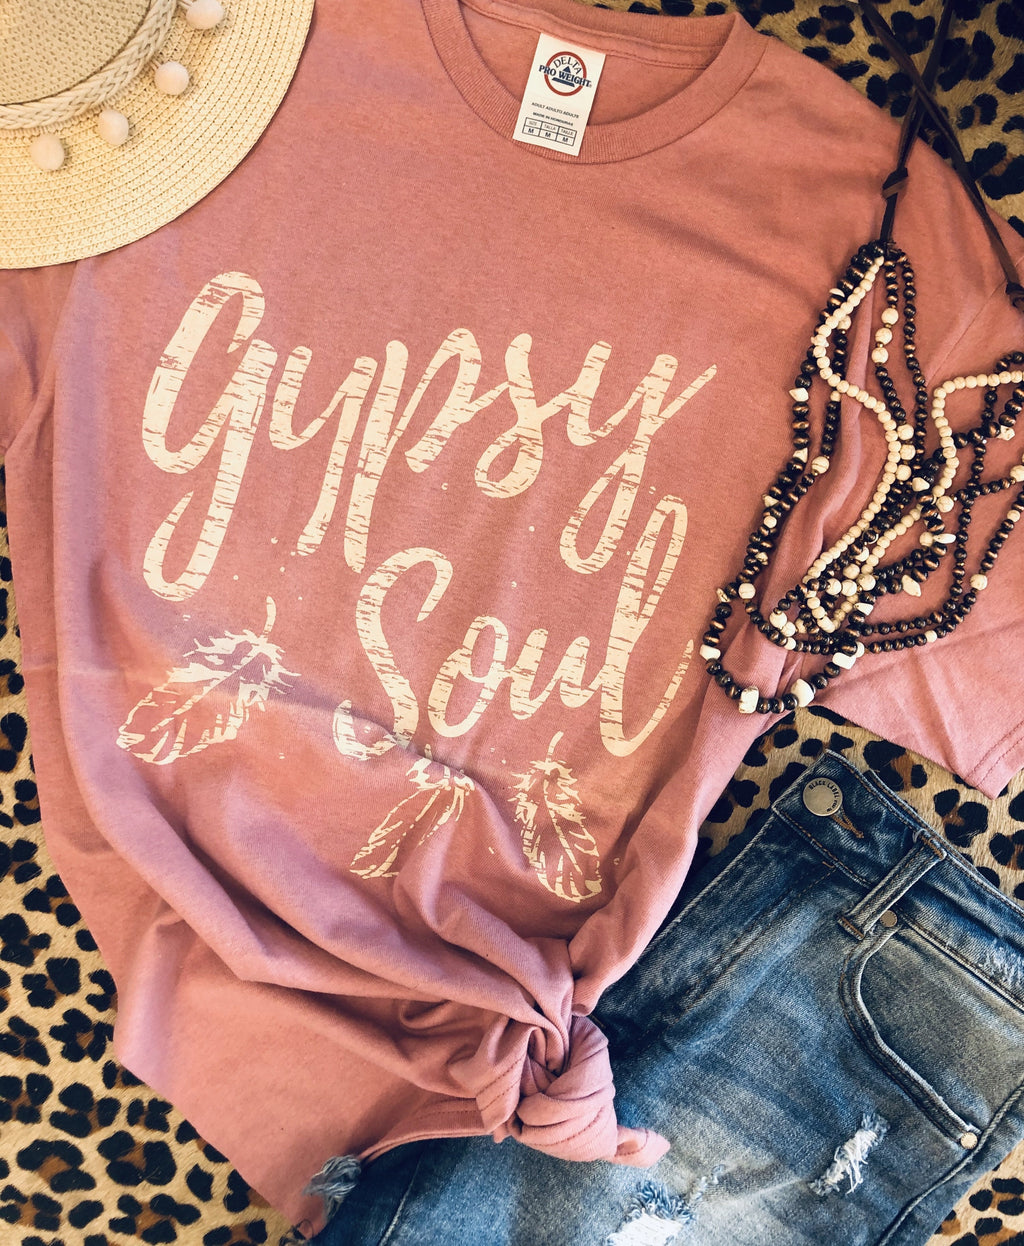 Gypsy Soul - Smarty Pants Boutique NH